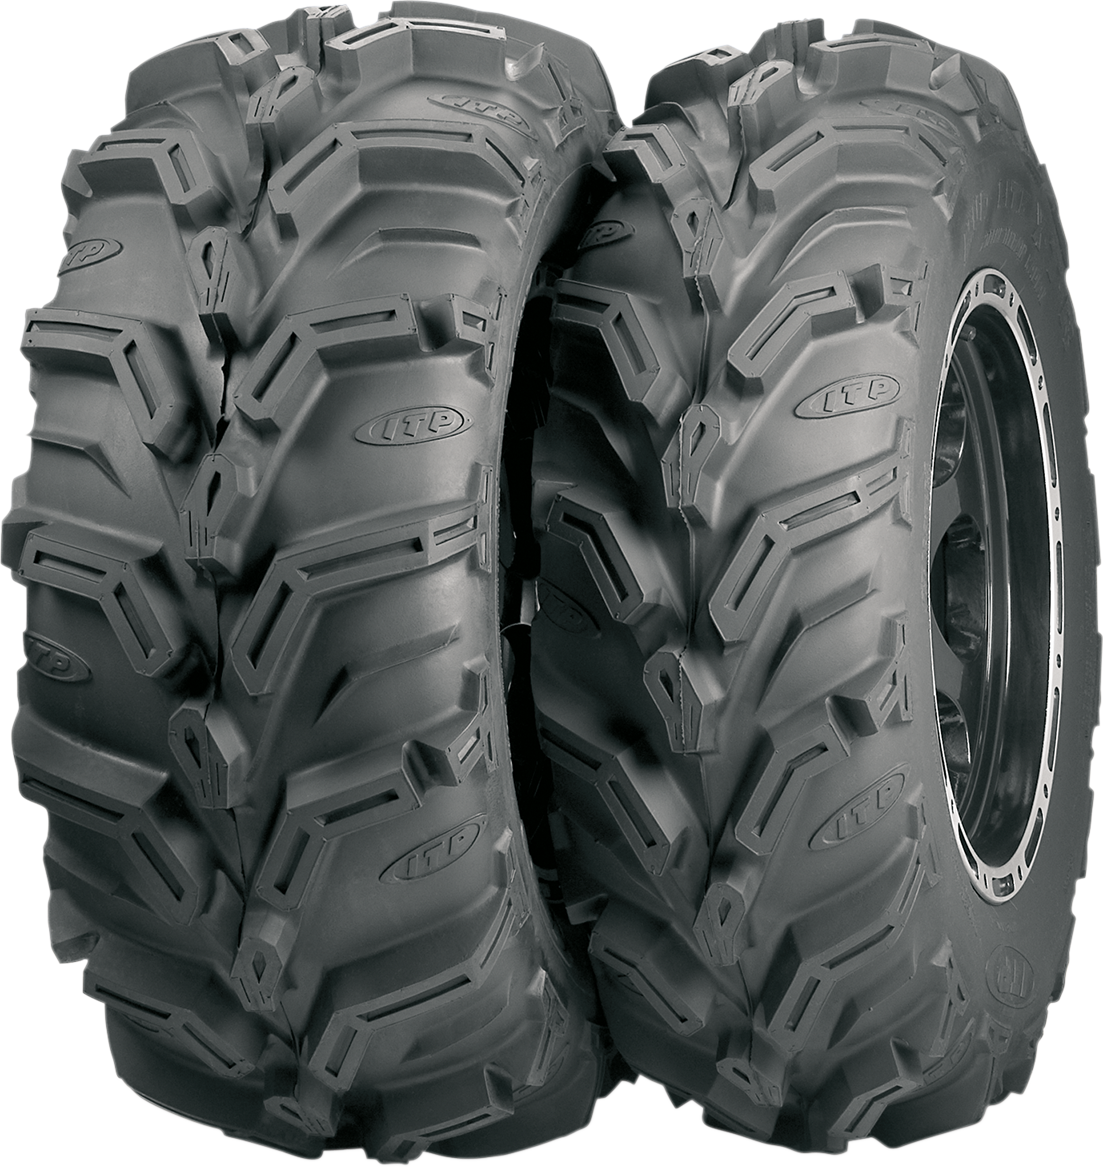 ITP Tire - Mud Lite XTR - Front/Rear - 26x11R12 - 6 Ply 560388